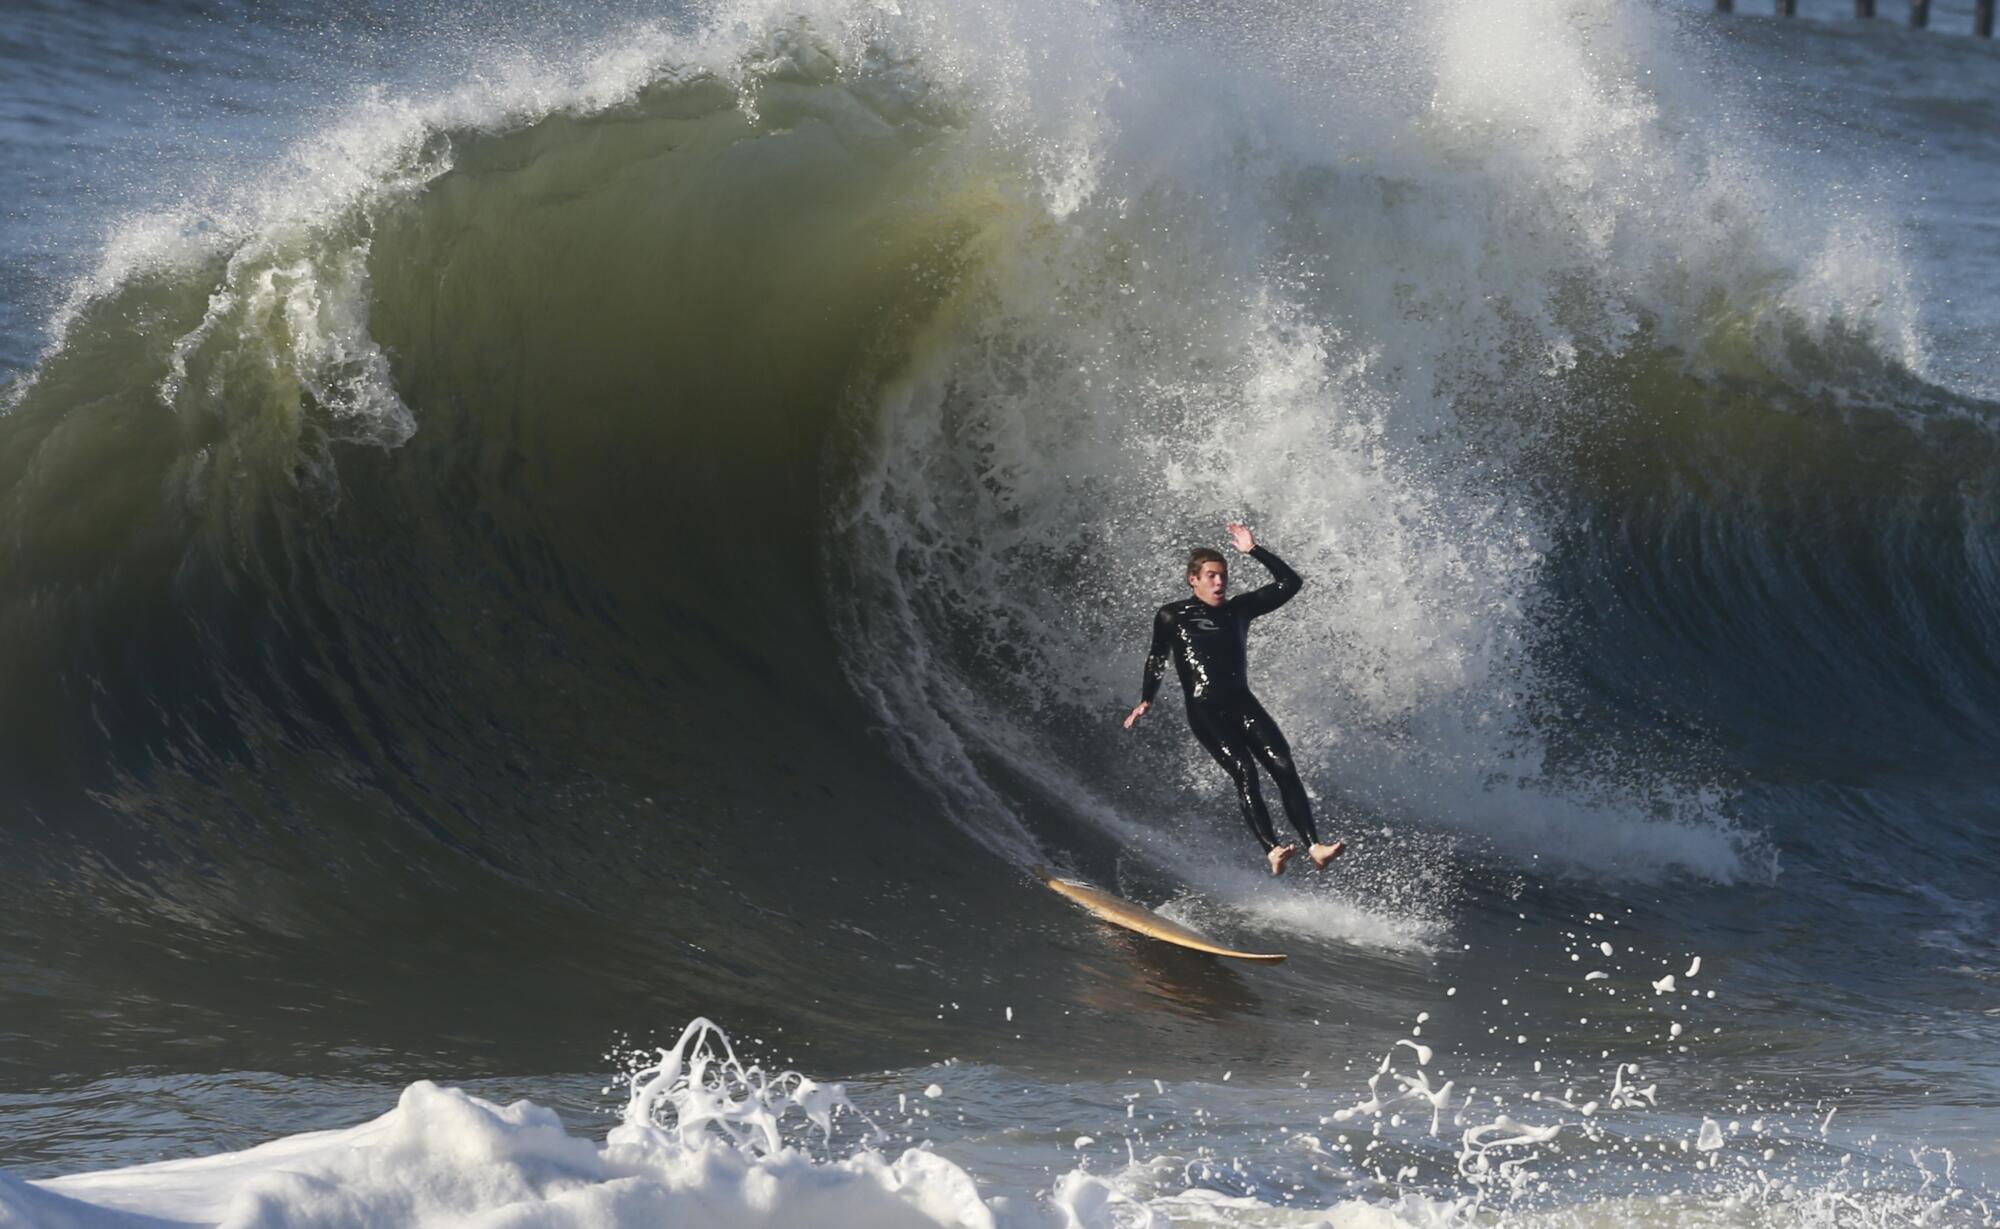 A surfer goes over the falls on a big wave in Seal Beach during stormy weather.